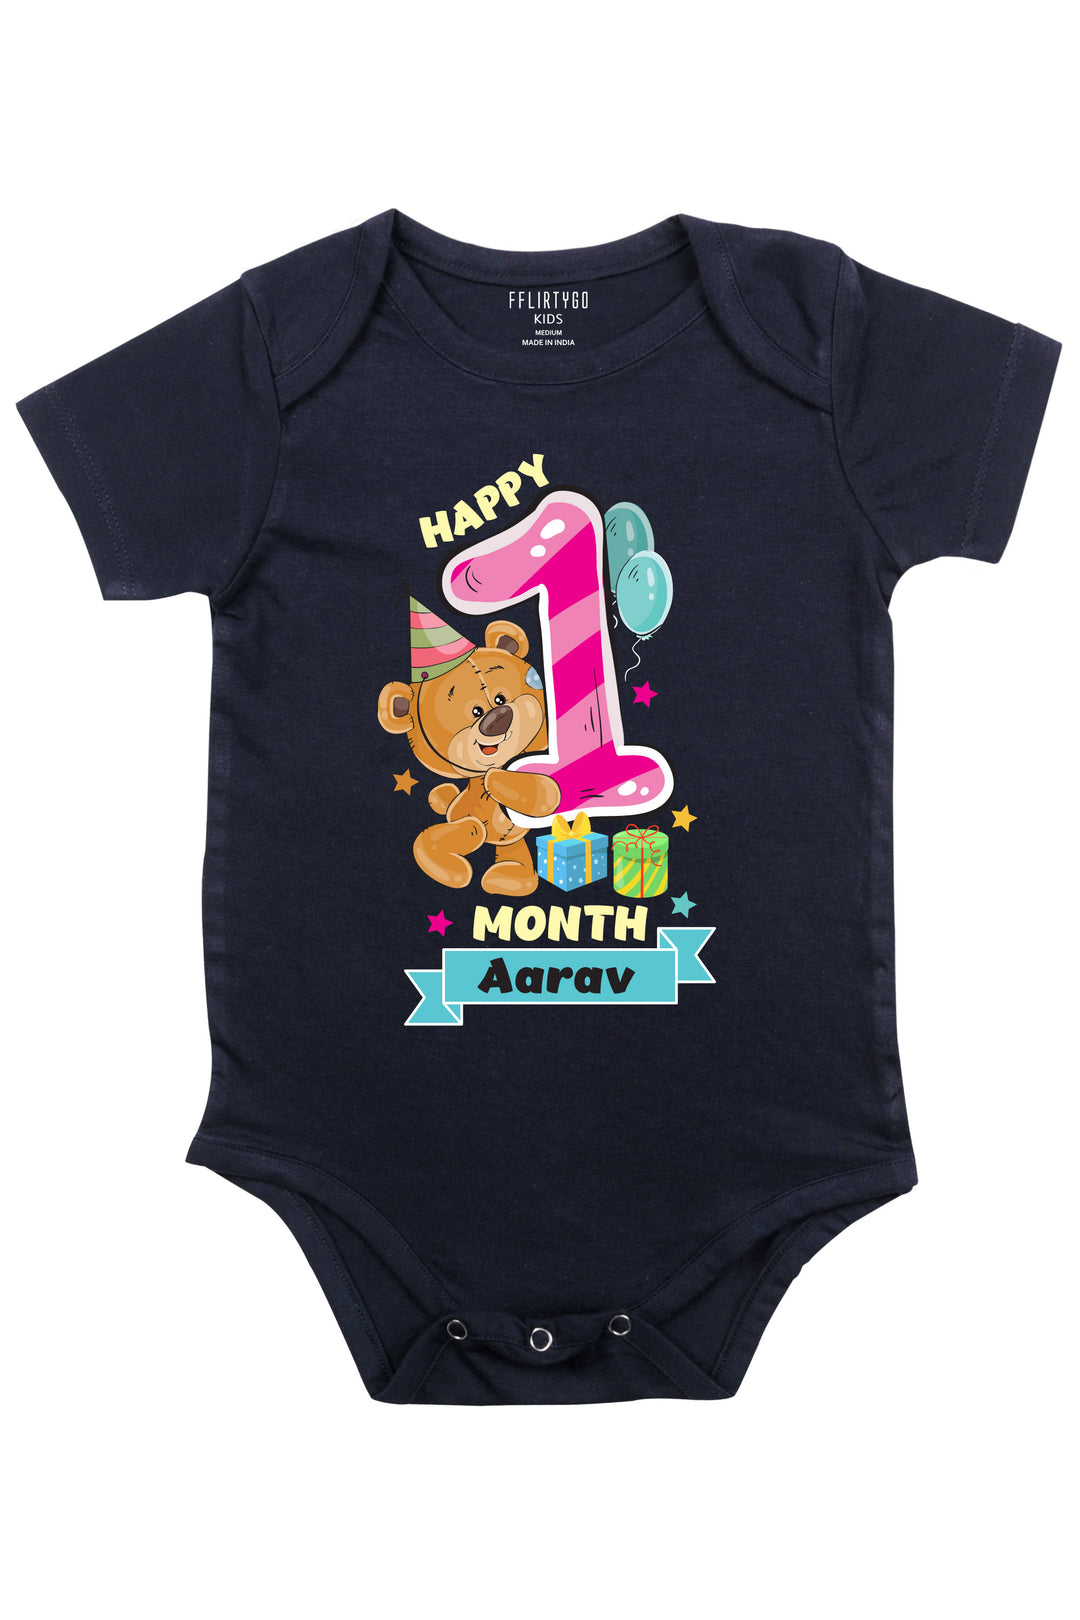 Discover a variety of onesies and baby rompers at Fflirtygo. From charming baby rompers to graphic onesies, find jumpsuit options for infants and 0-3 month rompers. Explore our collection, including the adorable blue newborn romper designs.